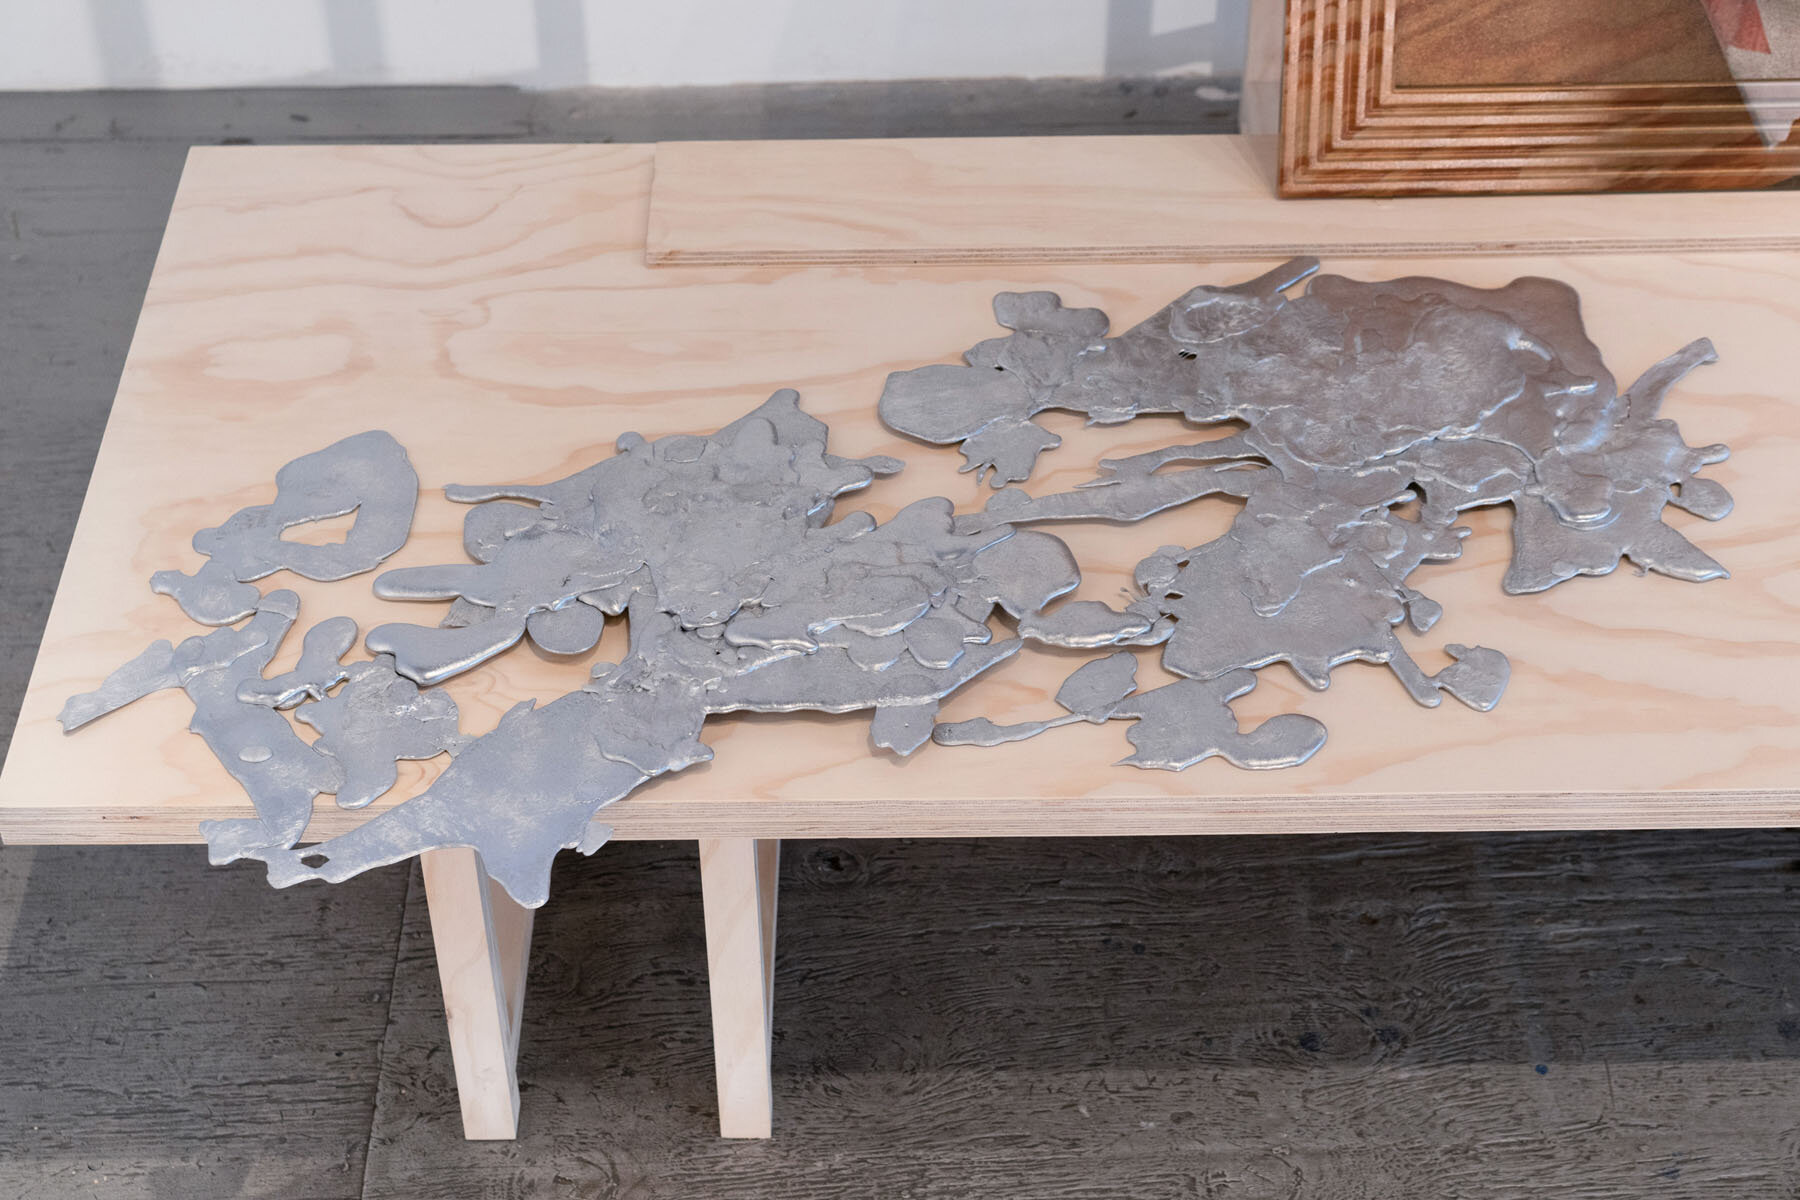   Large Stain , 2019, poured aluminum 49 x 21.5 x 1.5 inches 